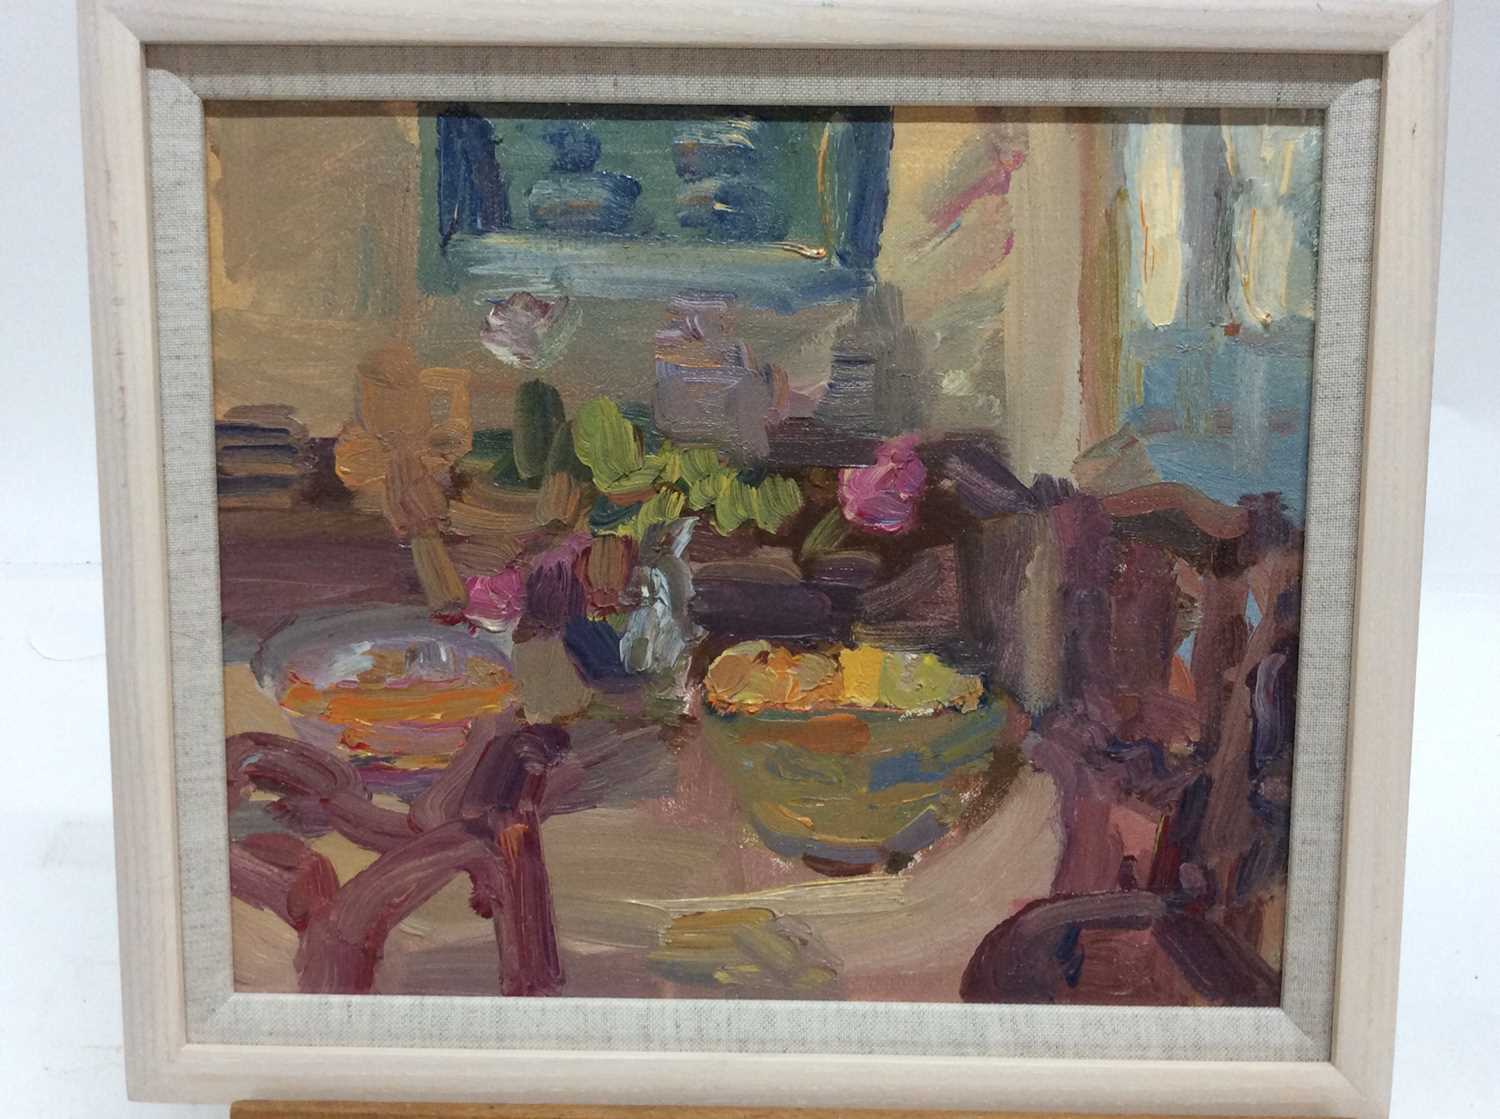 Lot 20 - Annelise Firth (b.1961) oil on board - Interior scene, signed and dated verso, framed, 24.5cm x 29.5cm, overall framed size 30.5cm x 35.5cm